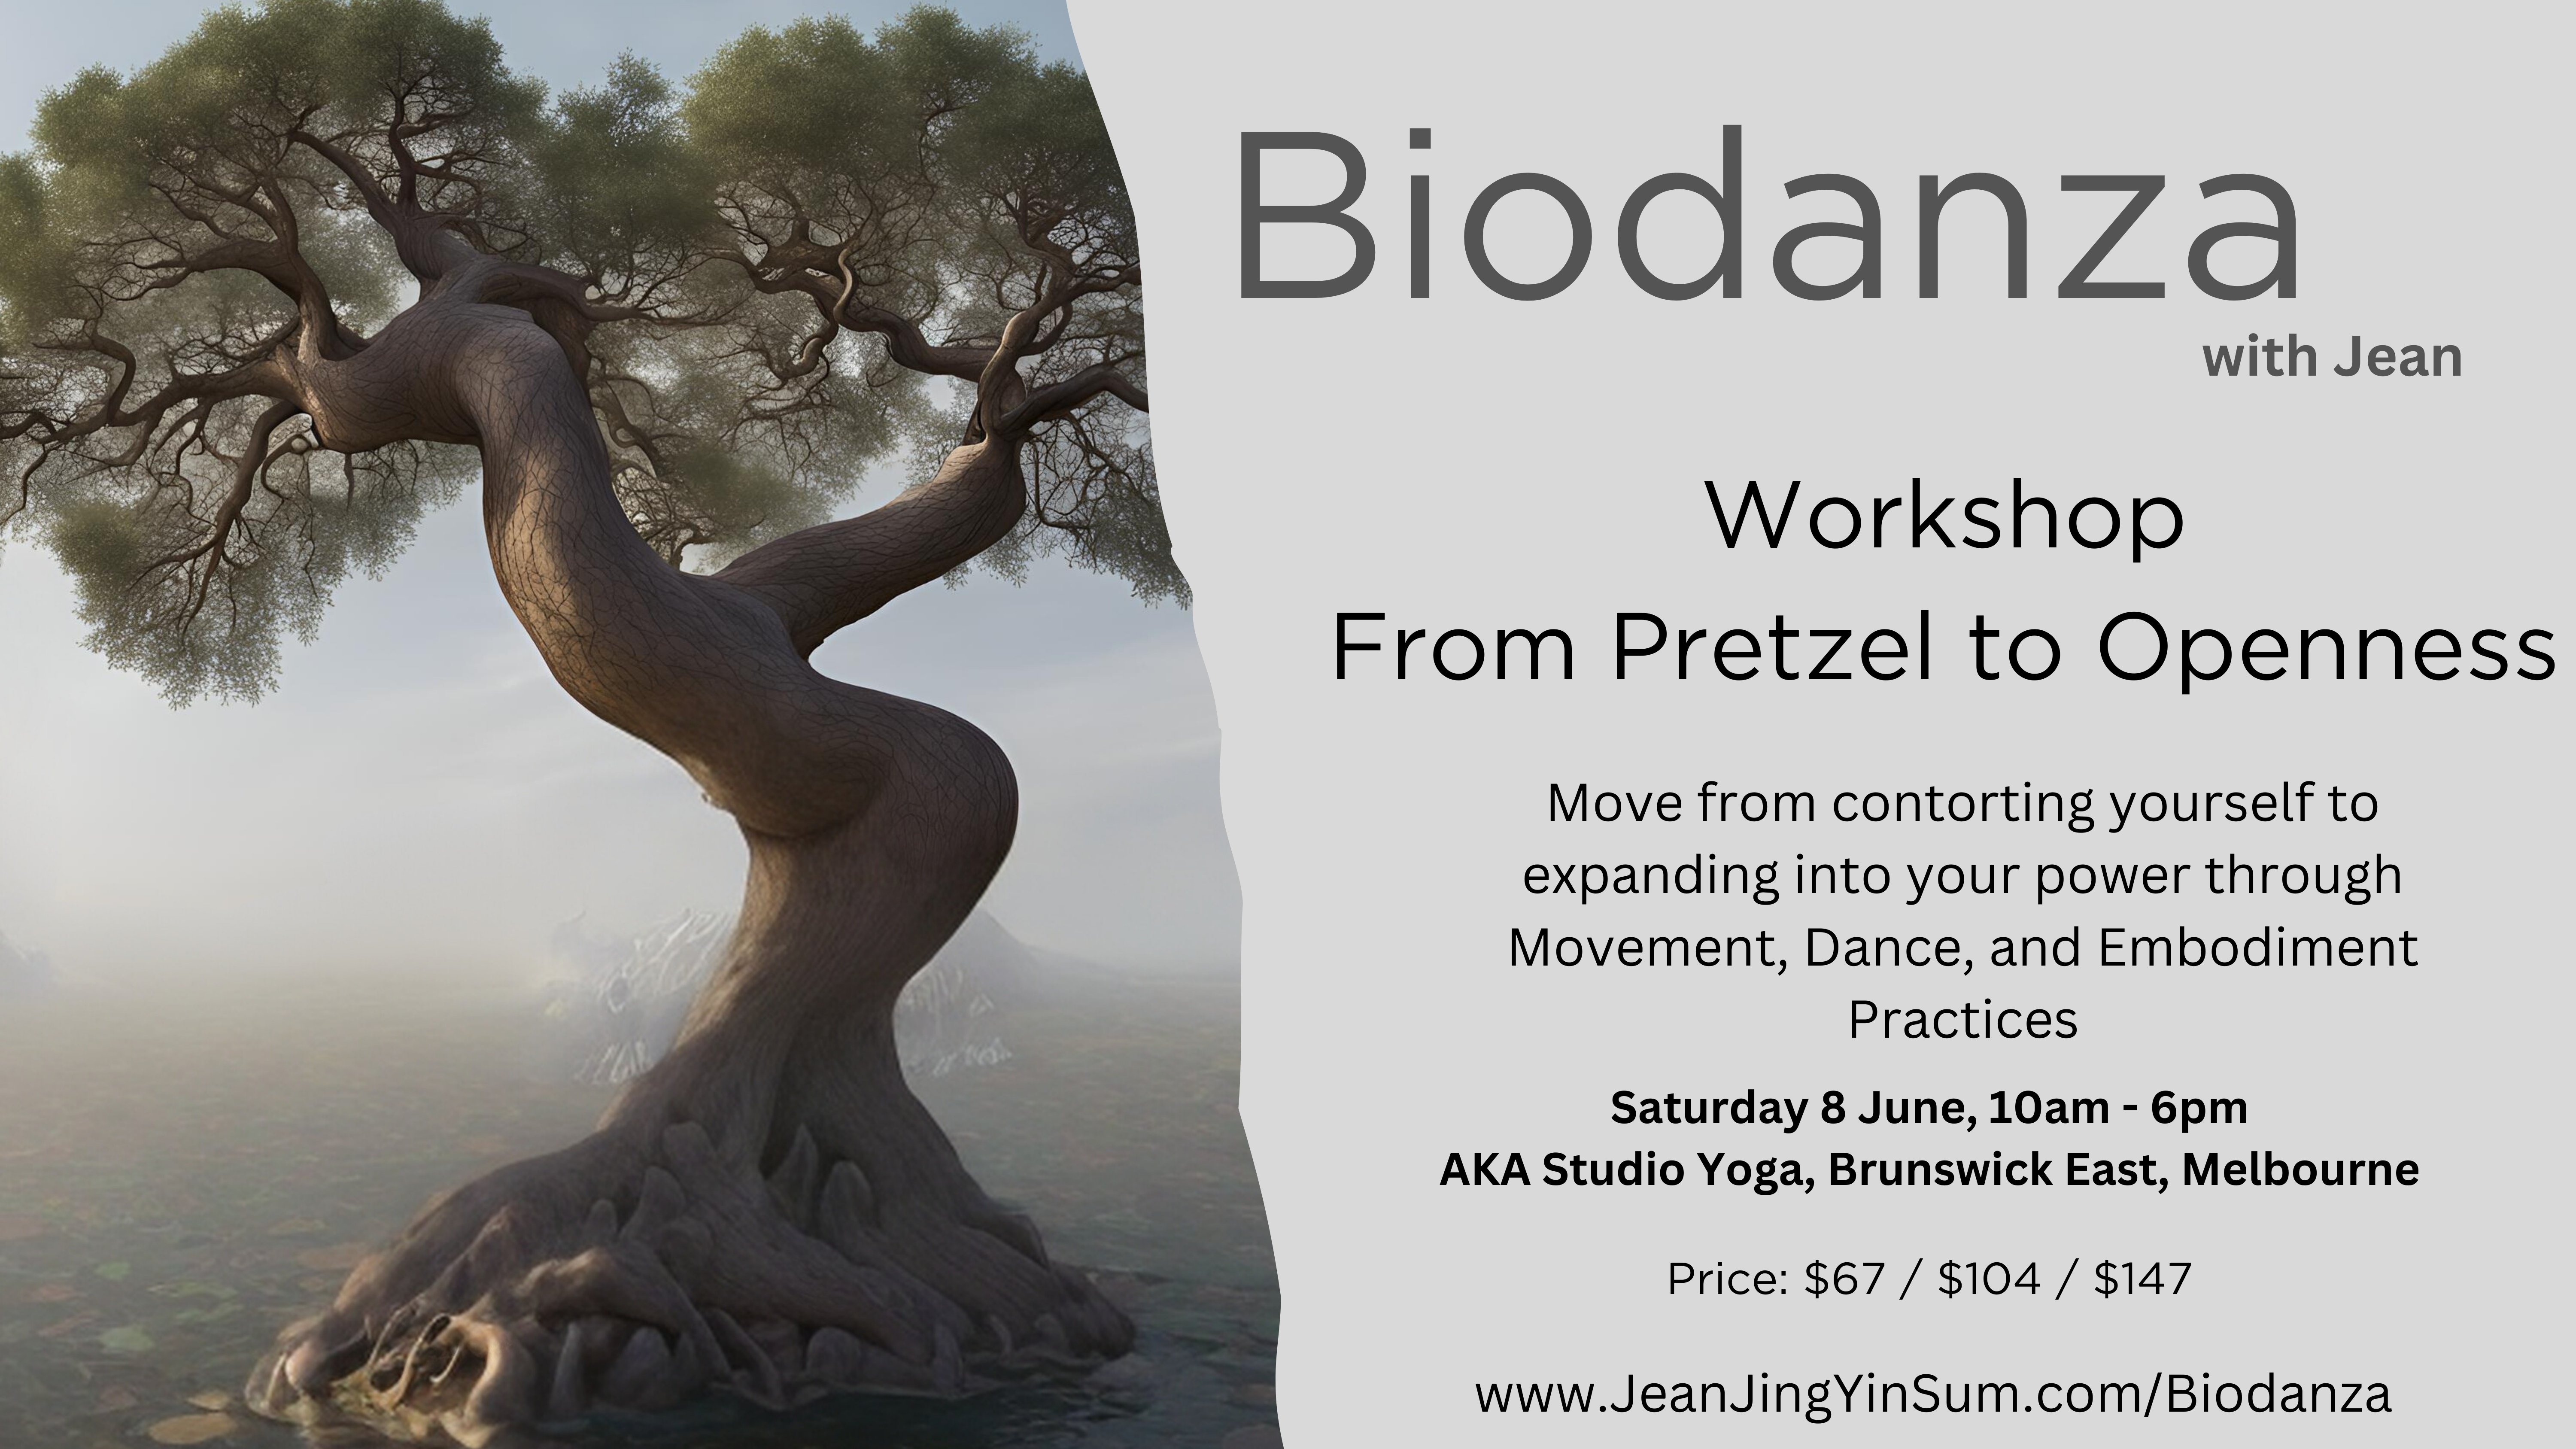 Workshop -Beyond Pandora's Box - A Biodanza and Creative journey to explore your gems from within